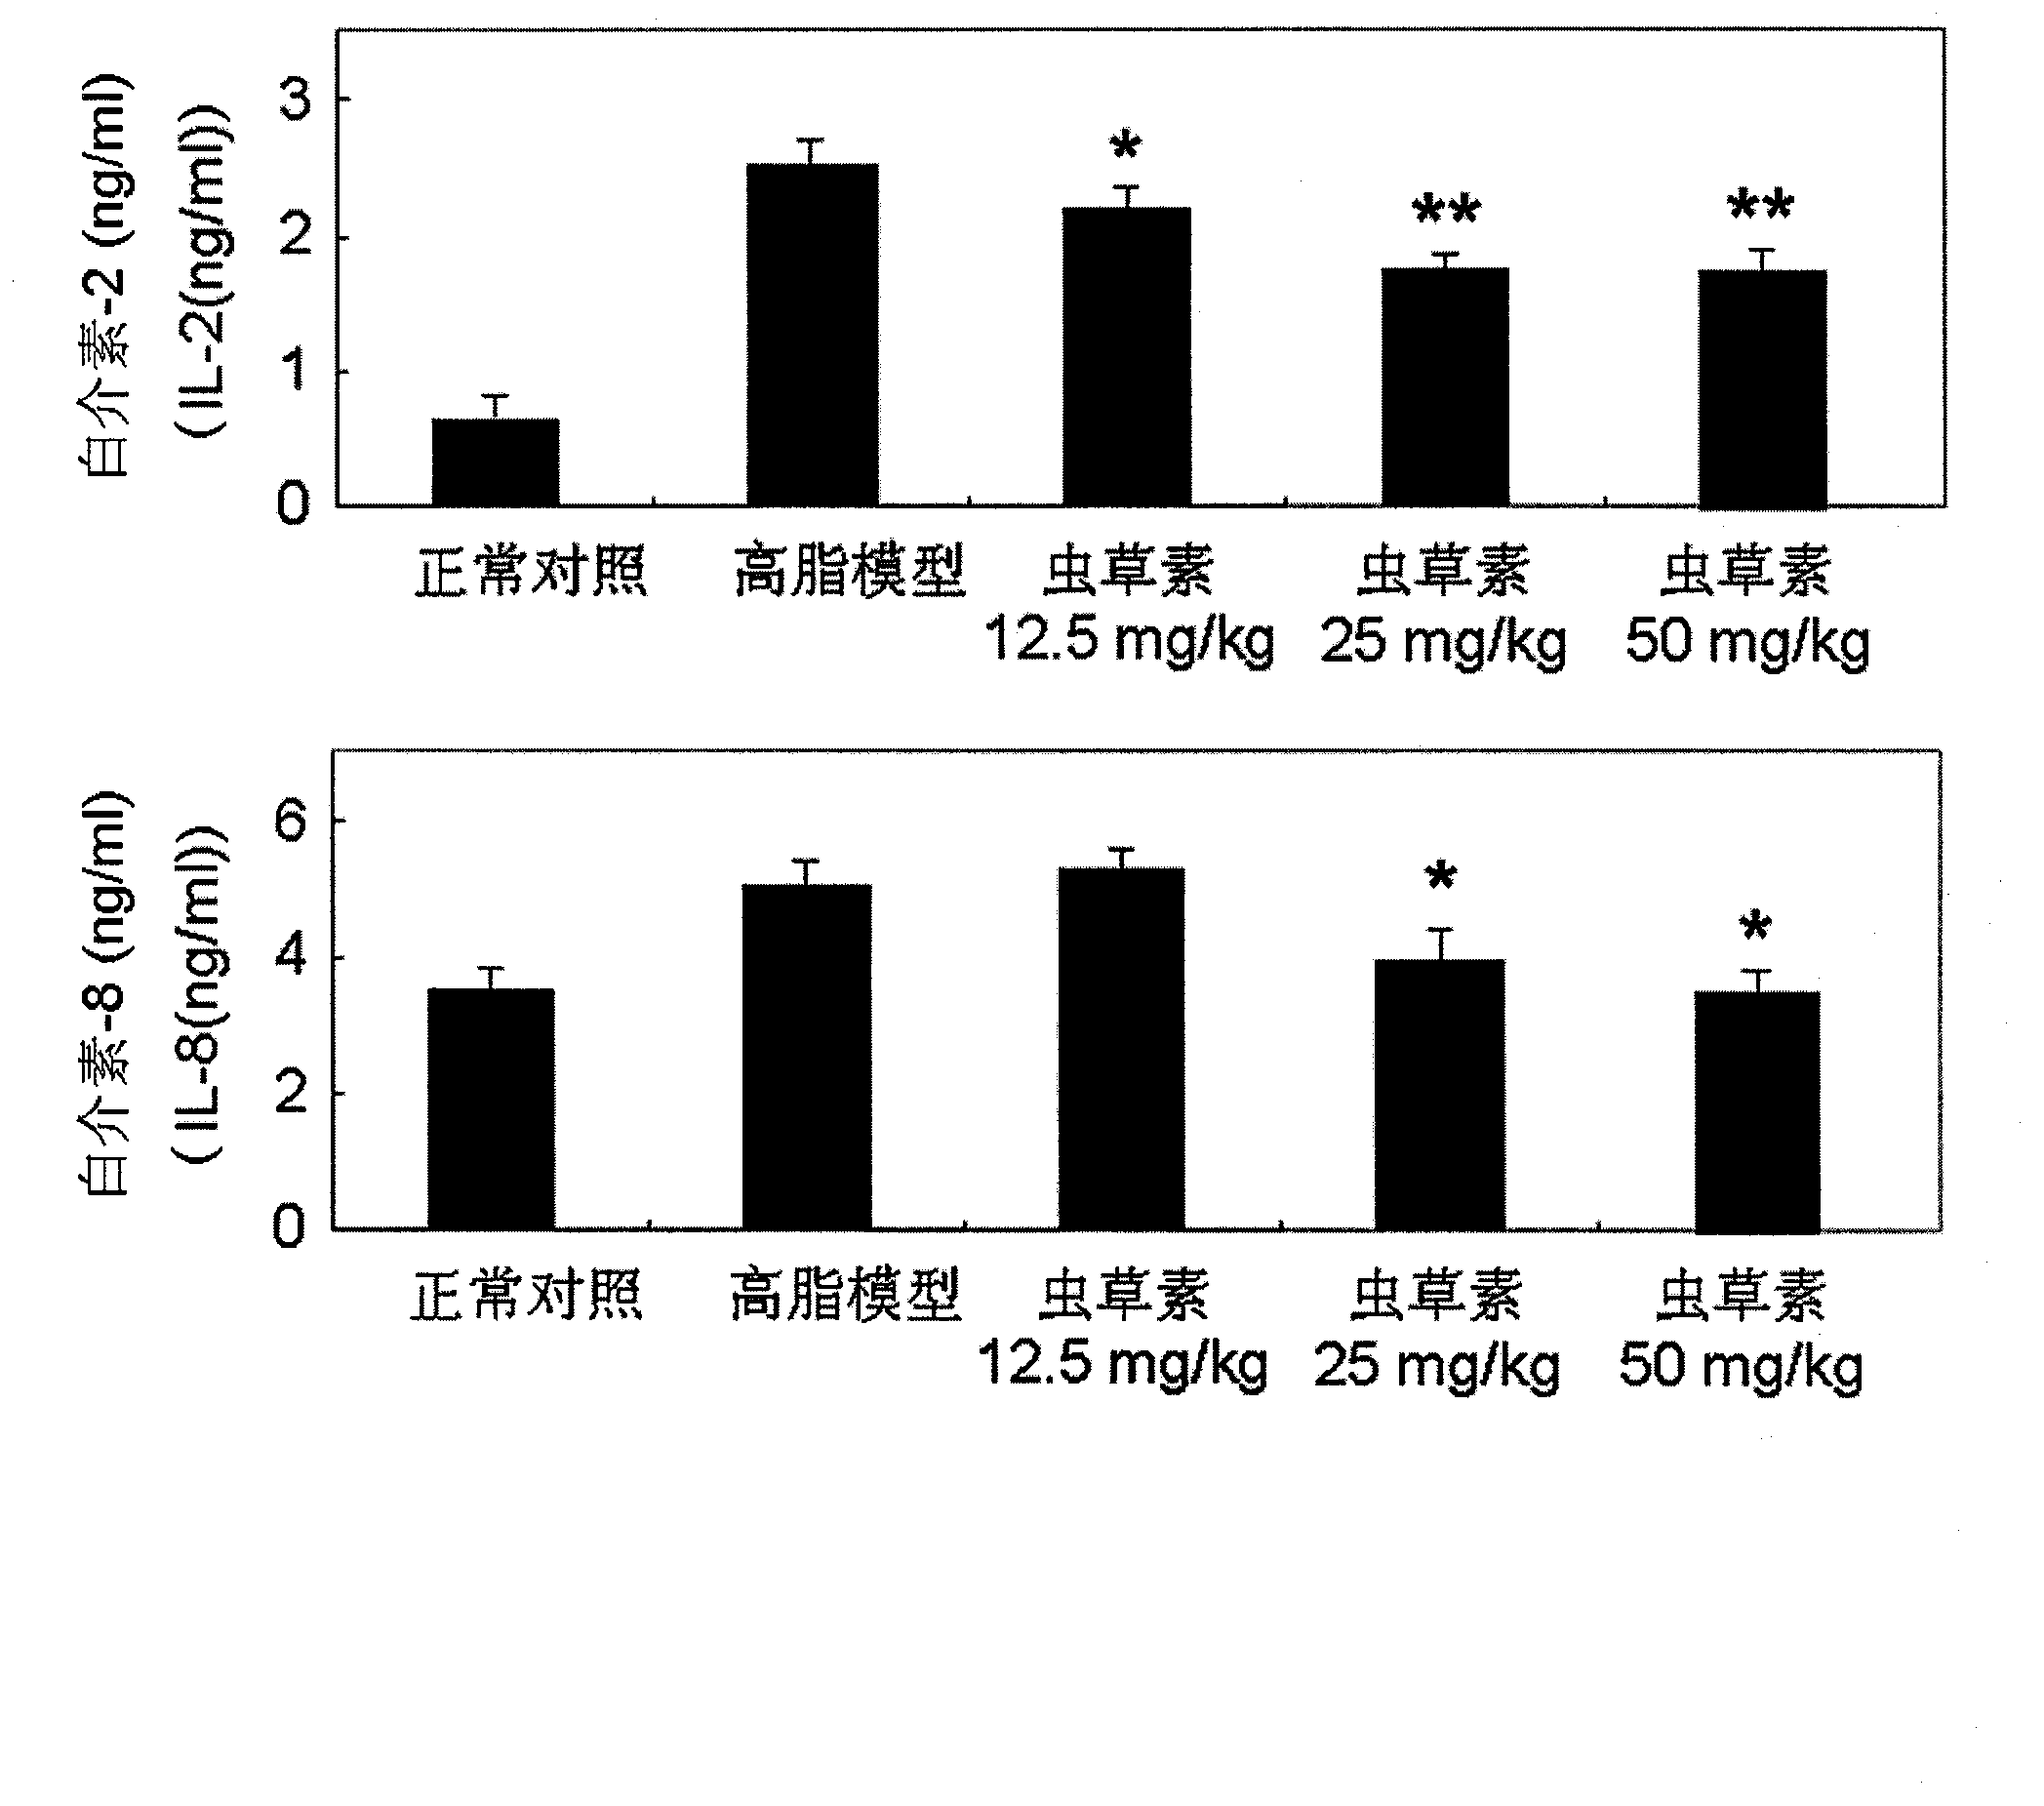 Applications of cordycepin used for preparation of medicines used for preventing and treating atherosclerosis